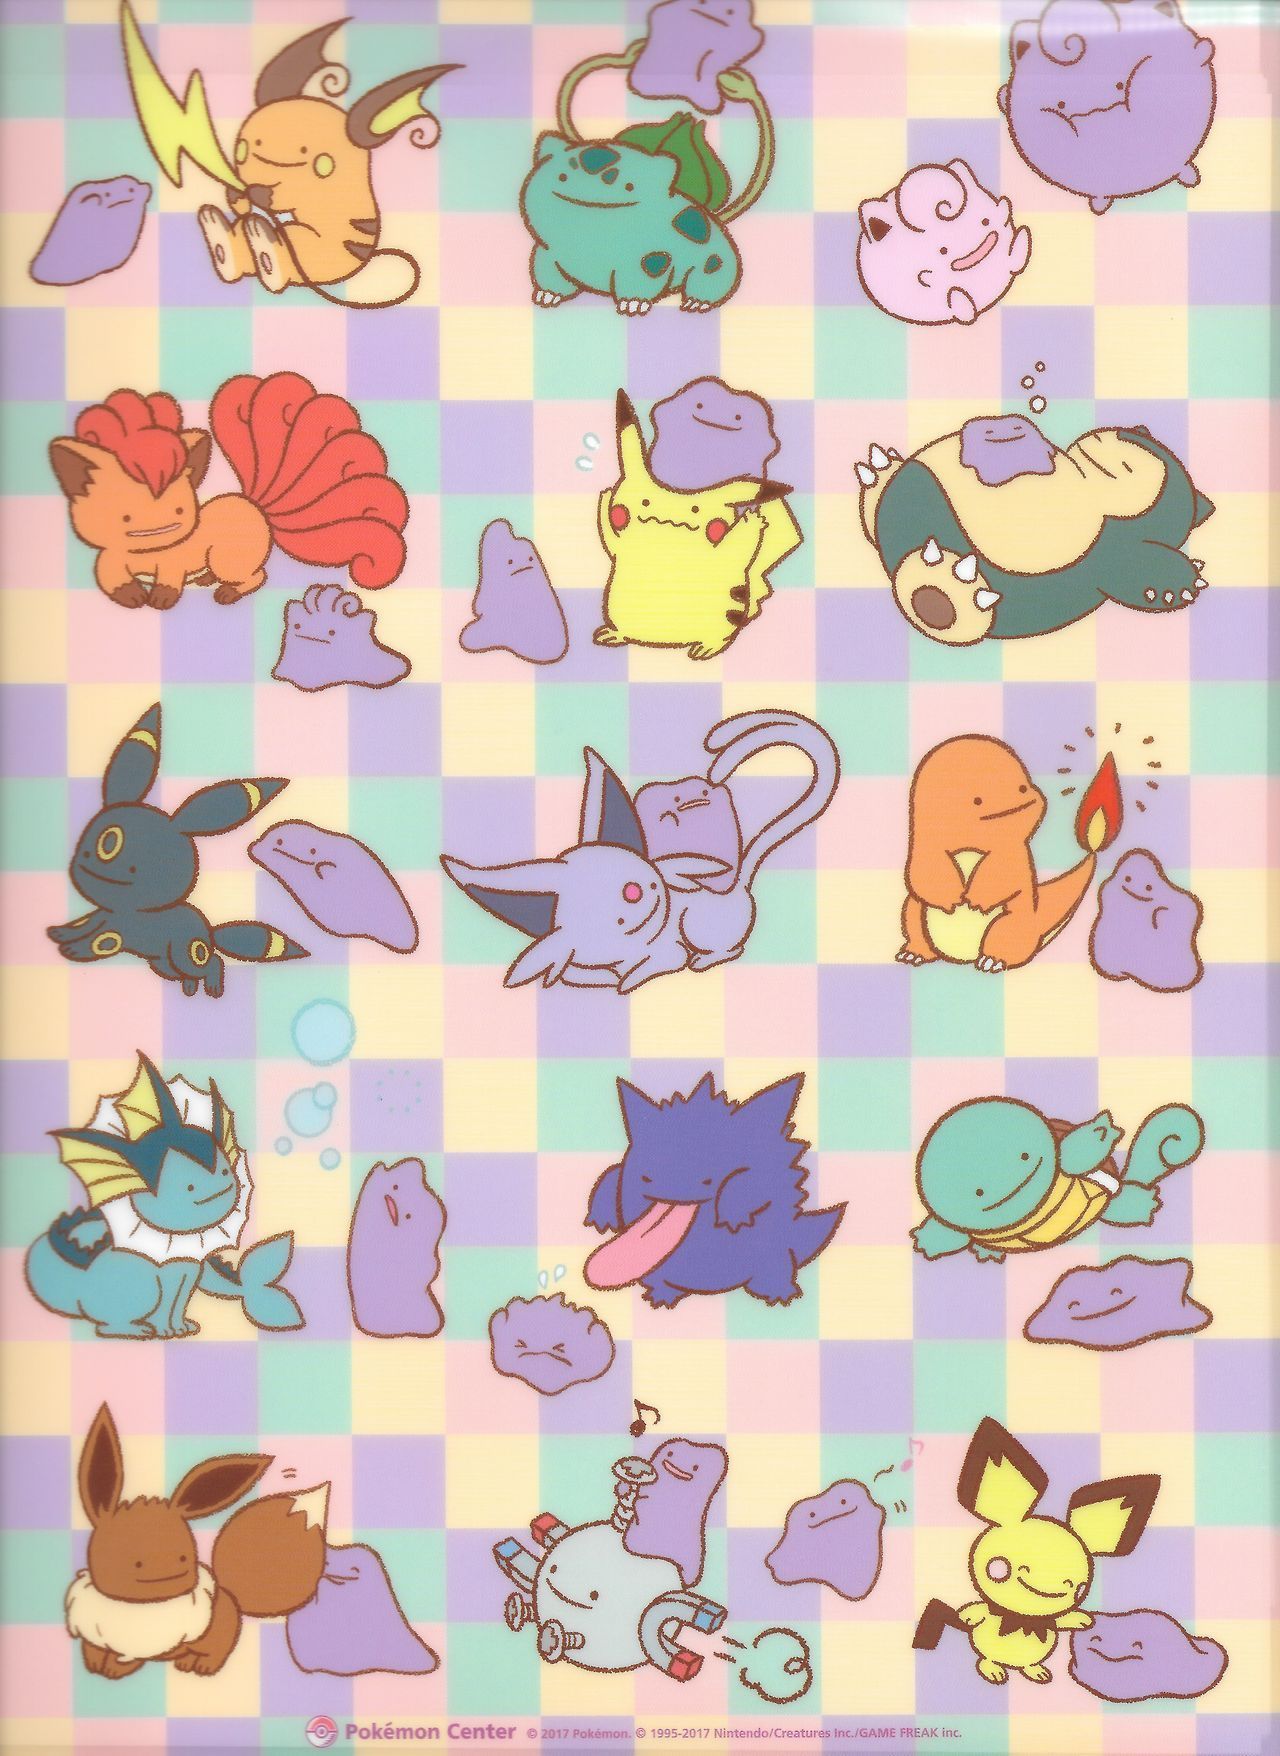 Pokémon Scans from PacificPikachu's Collection. Pokemon ditto, Pokemon picture, Pokemon drawings